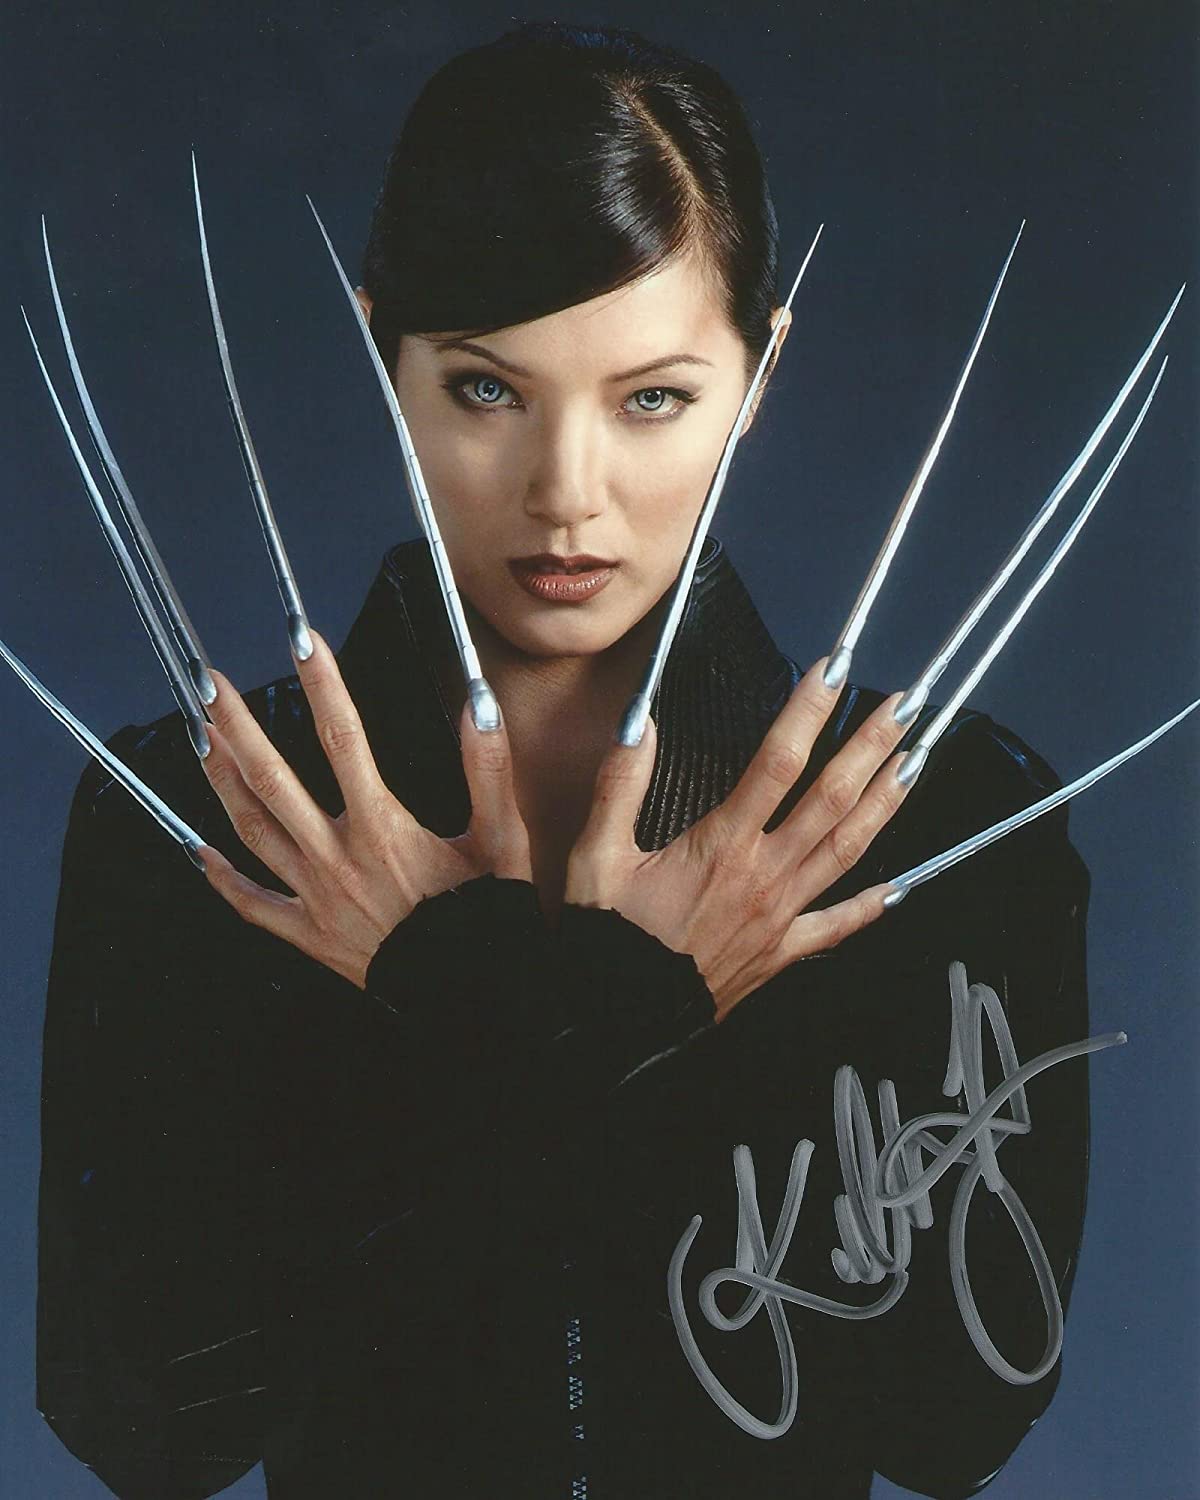 X Men X2 Lady Deathstrike Signed Autographed Kelly Hu 8x10 Photo At Amazon's Entertainment Collectibles Store